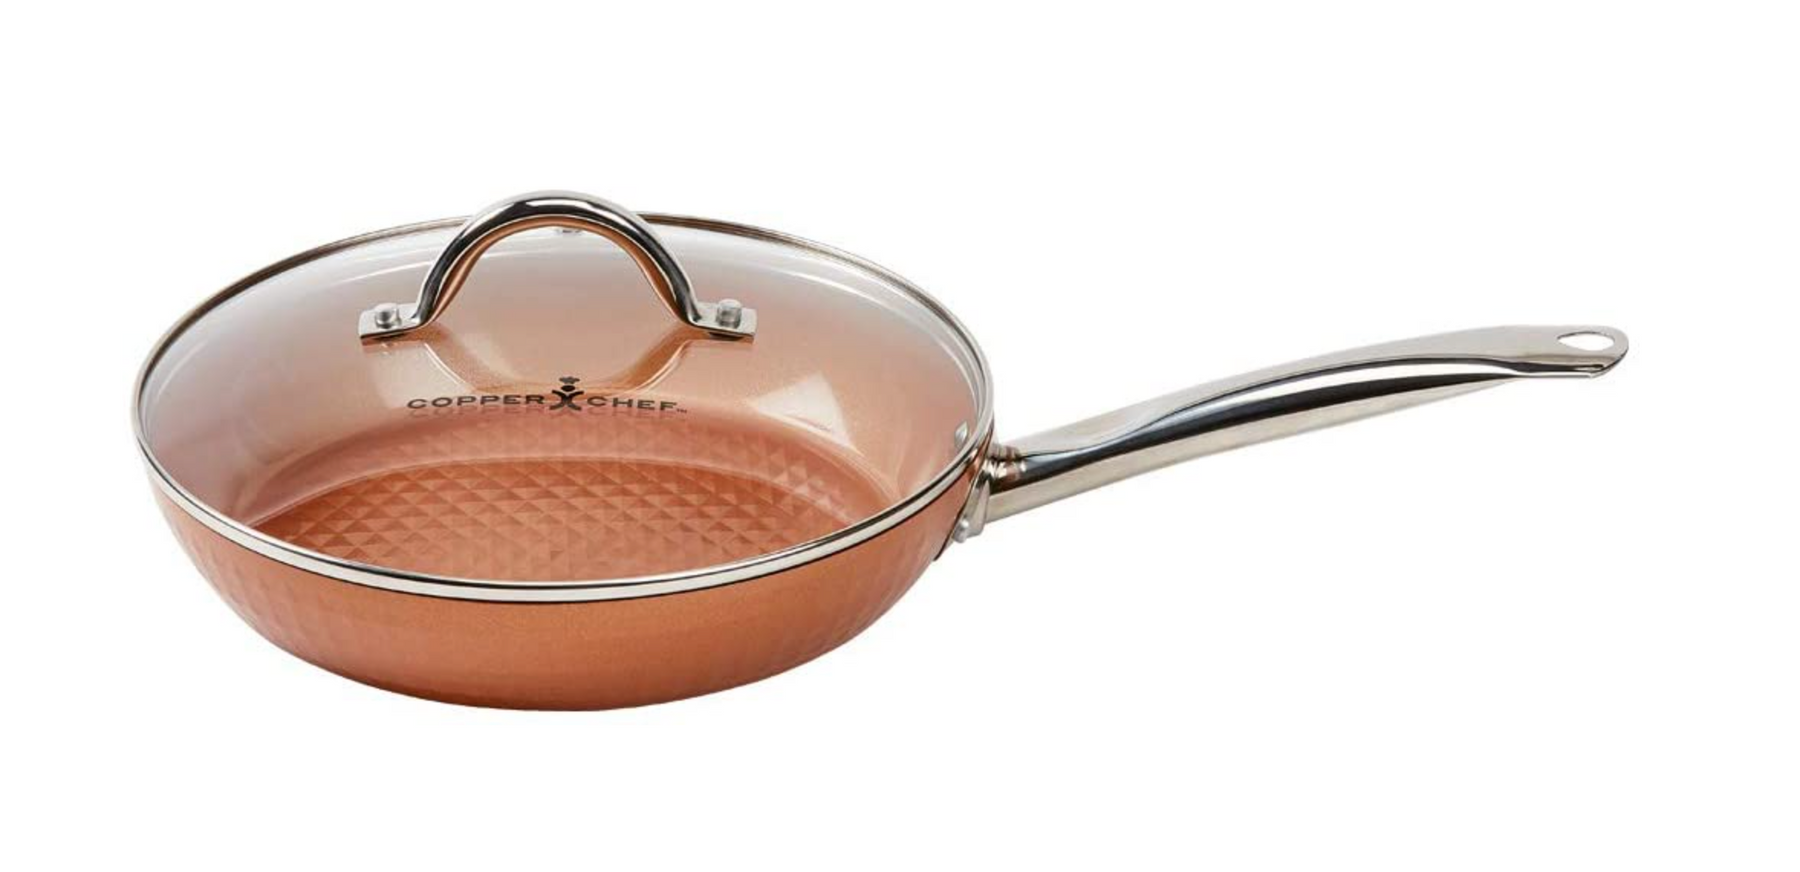  Copper Chef 10 Inch Round Frying Pan With Lid